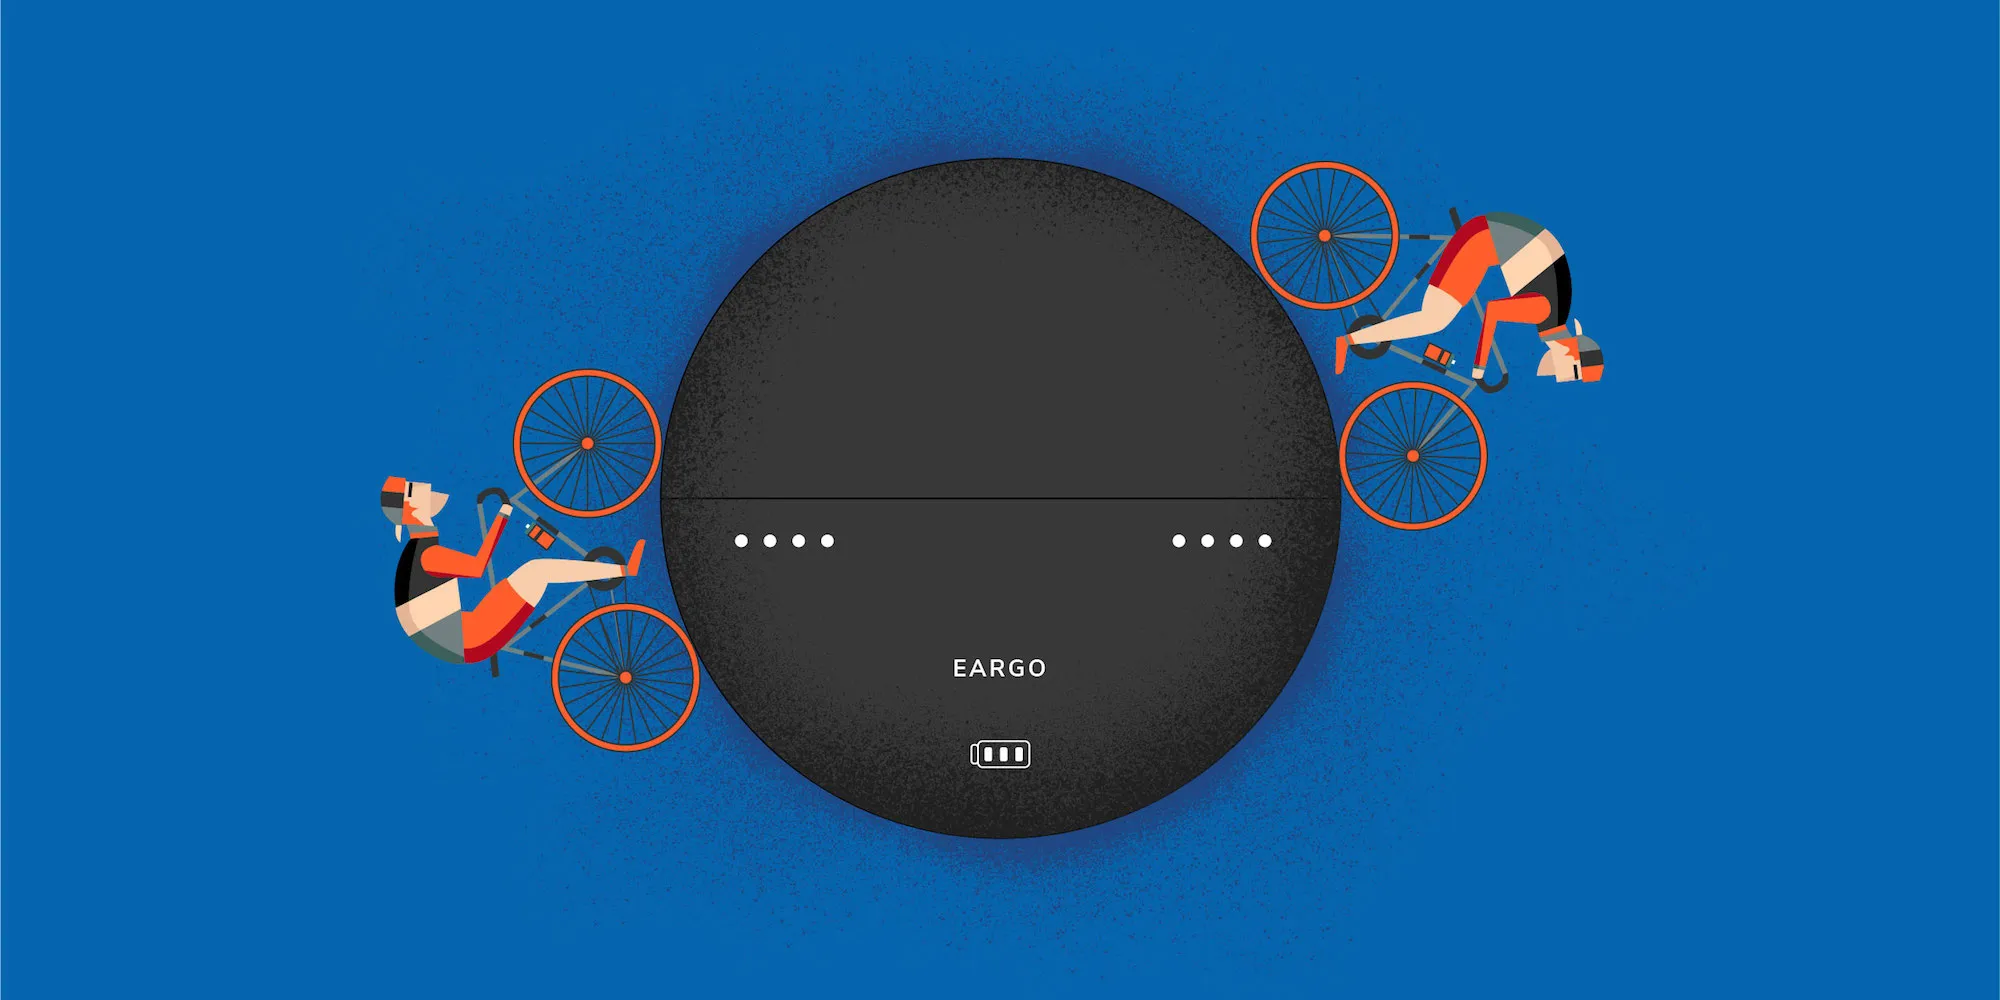 Eargo charger with bicyclist illustration